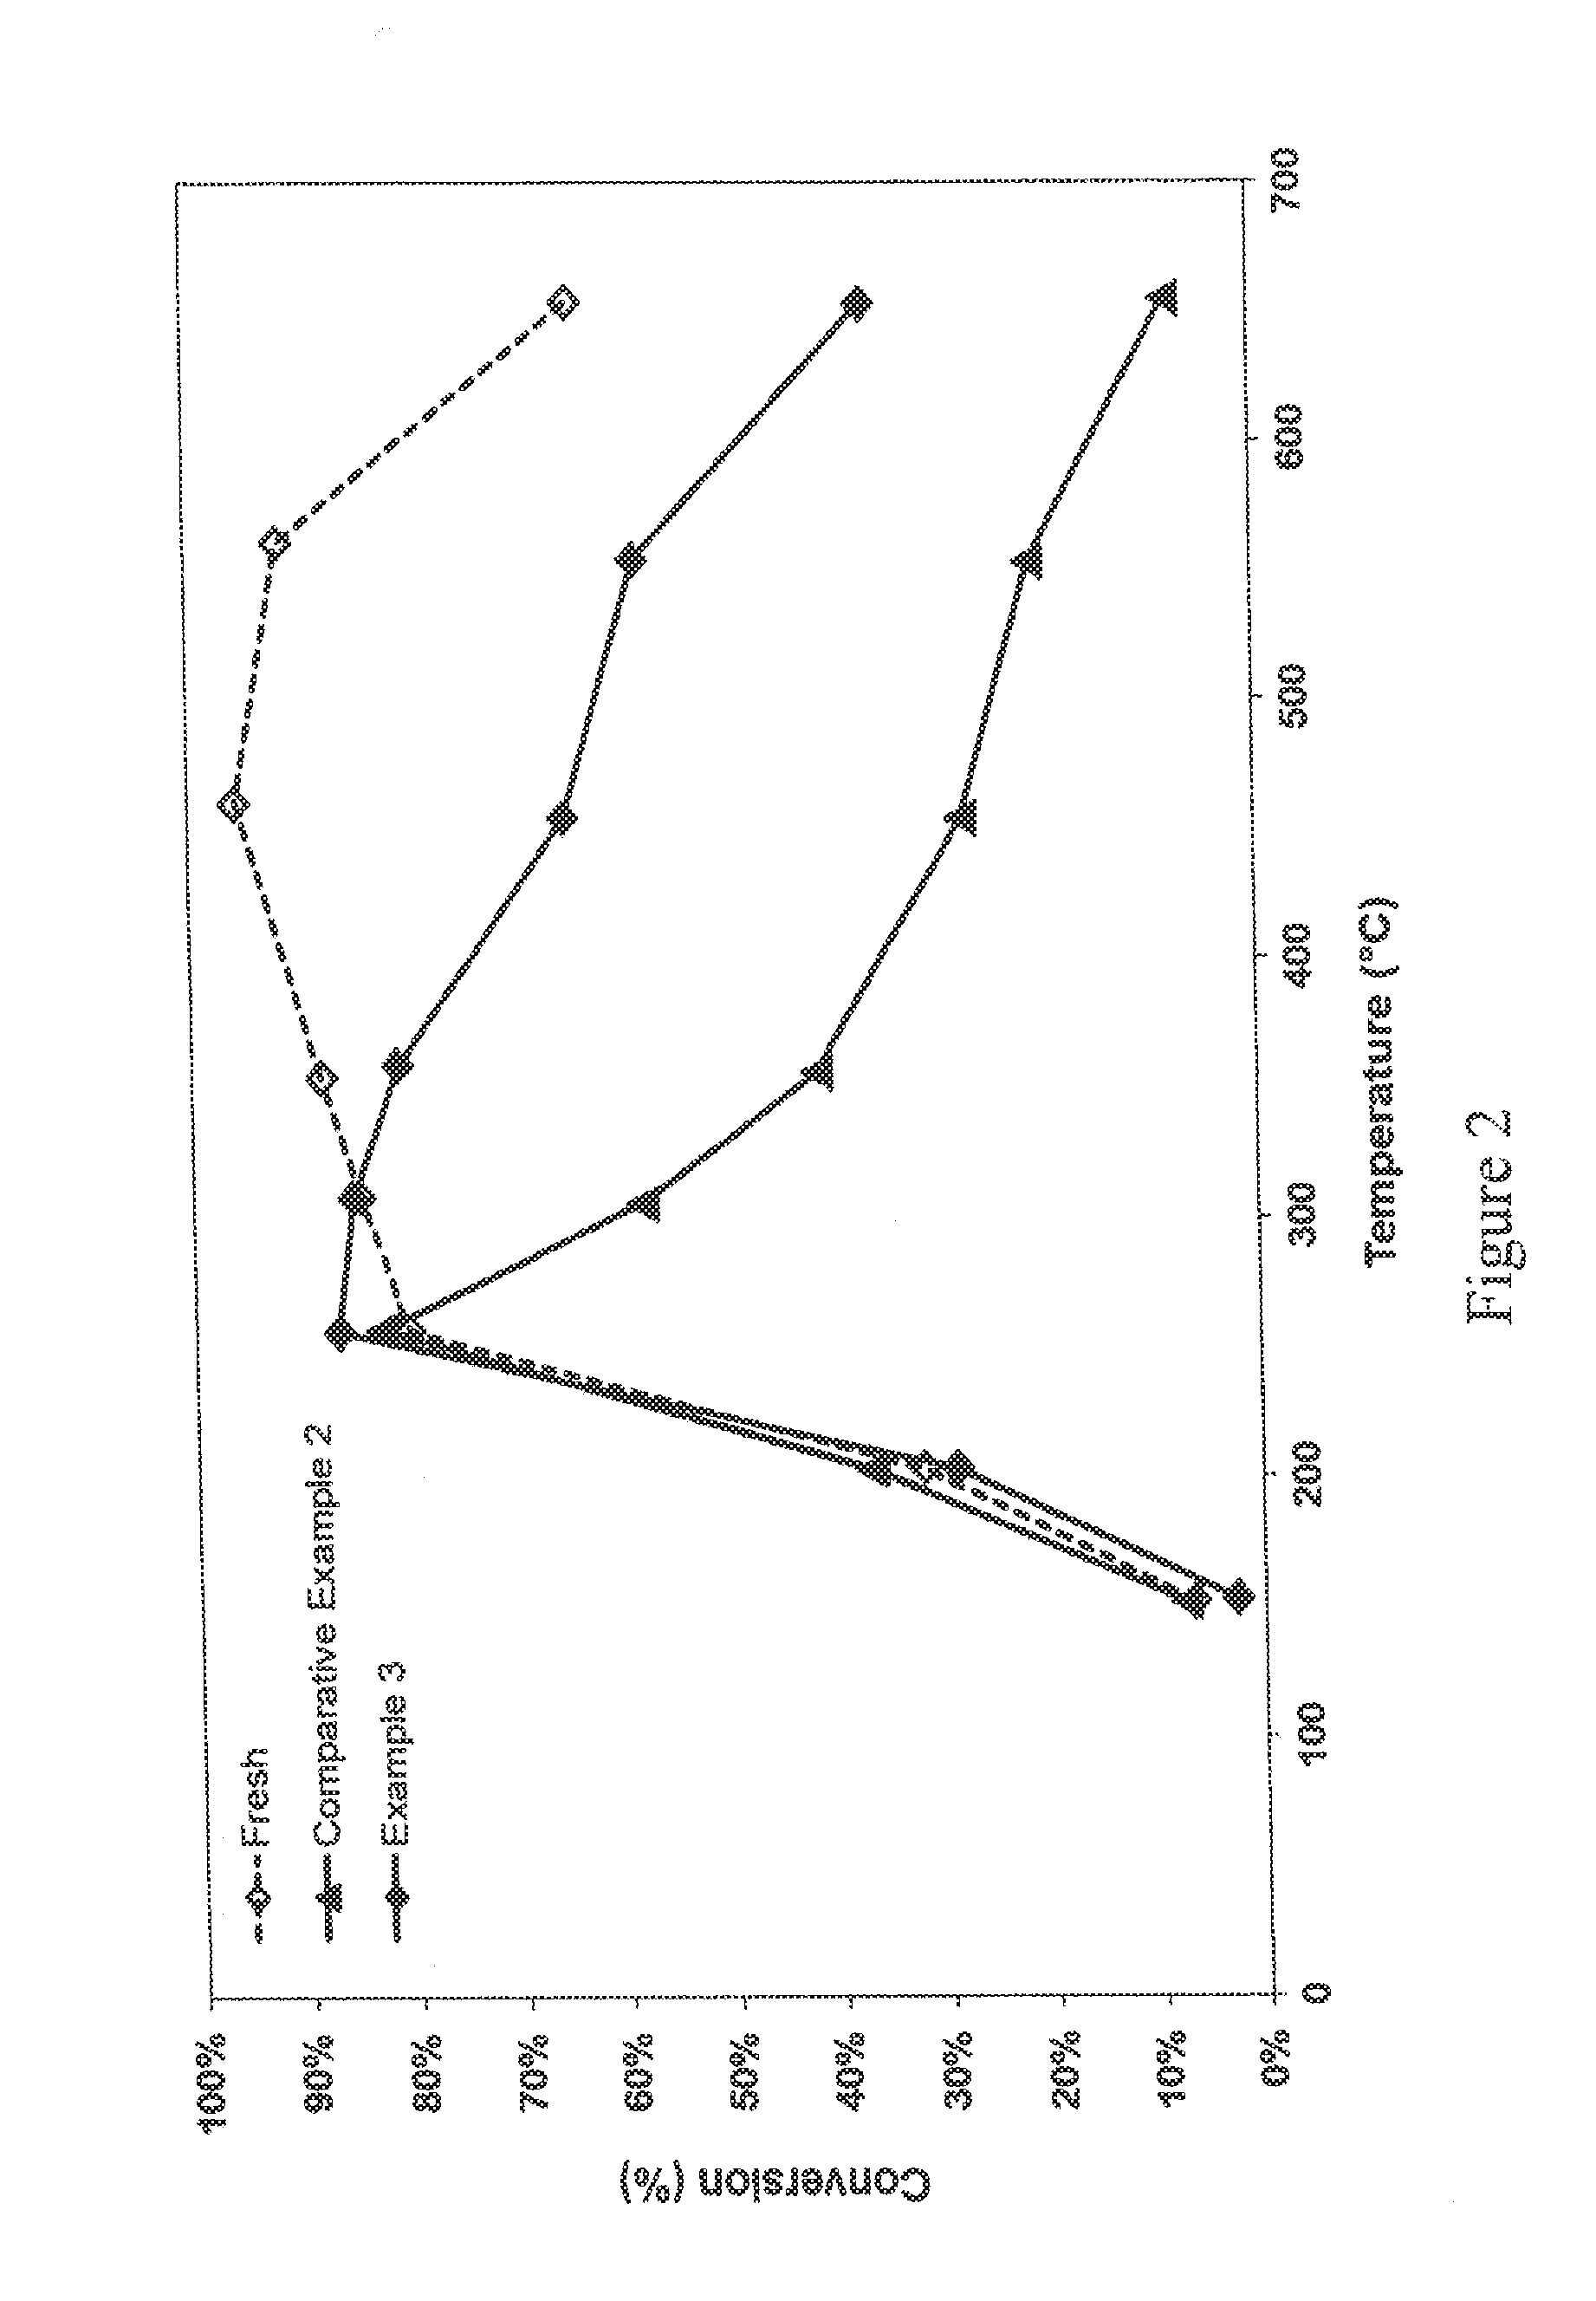 Exhaust system for a lean-burn internal combustion engine including scr catalyst